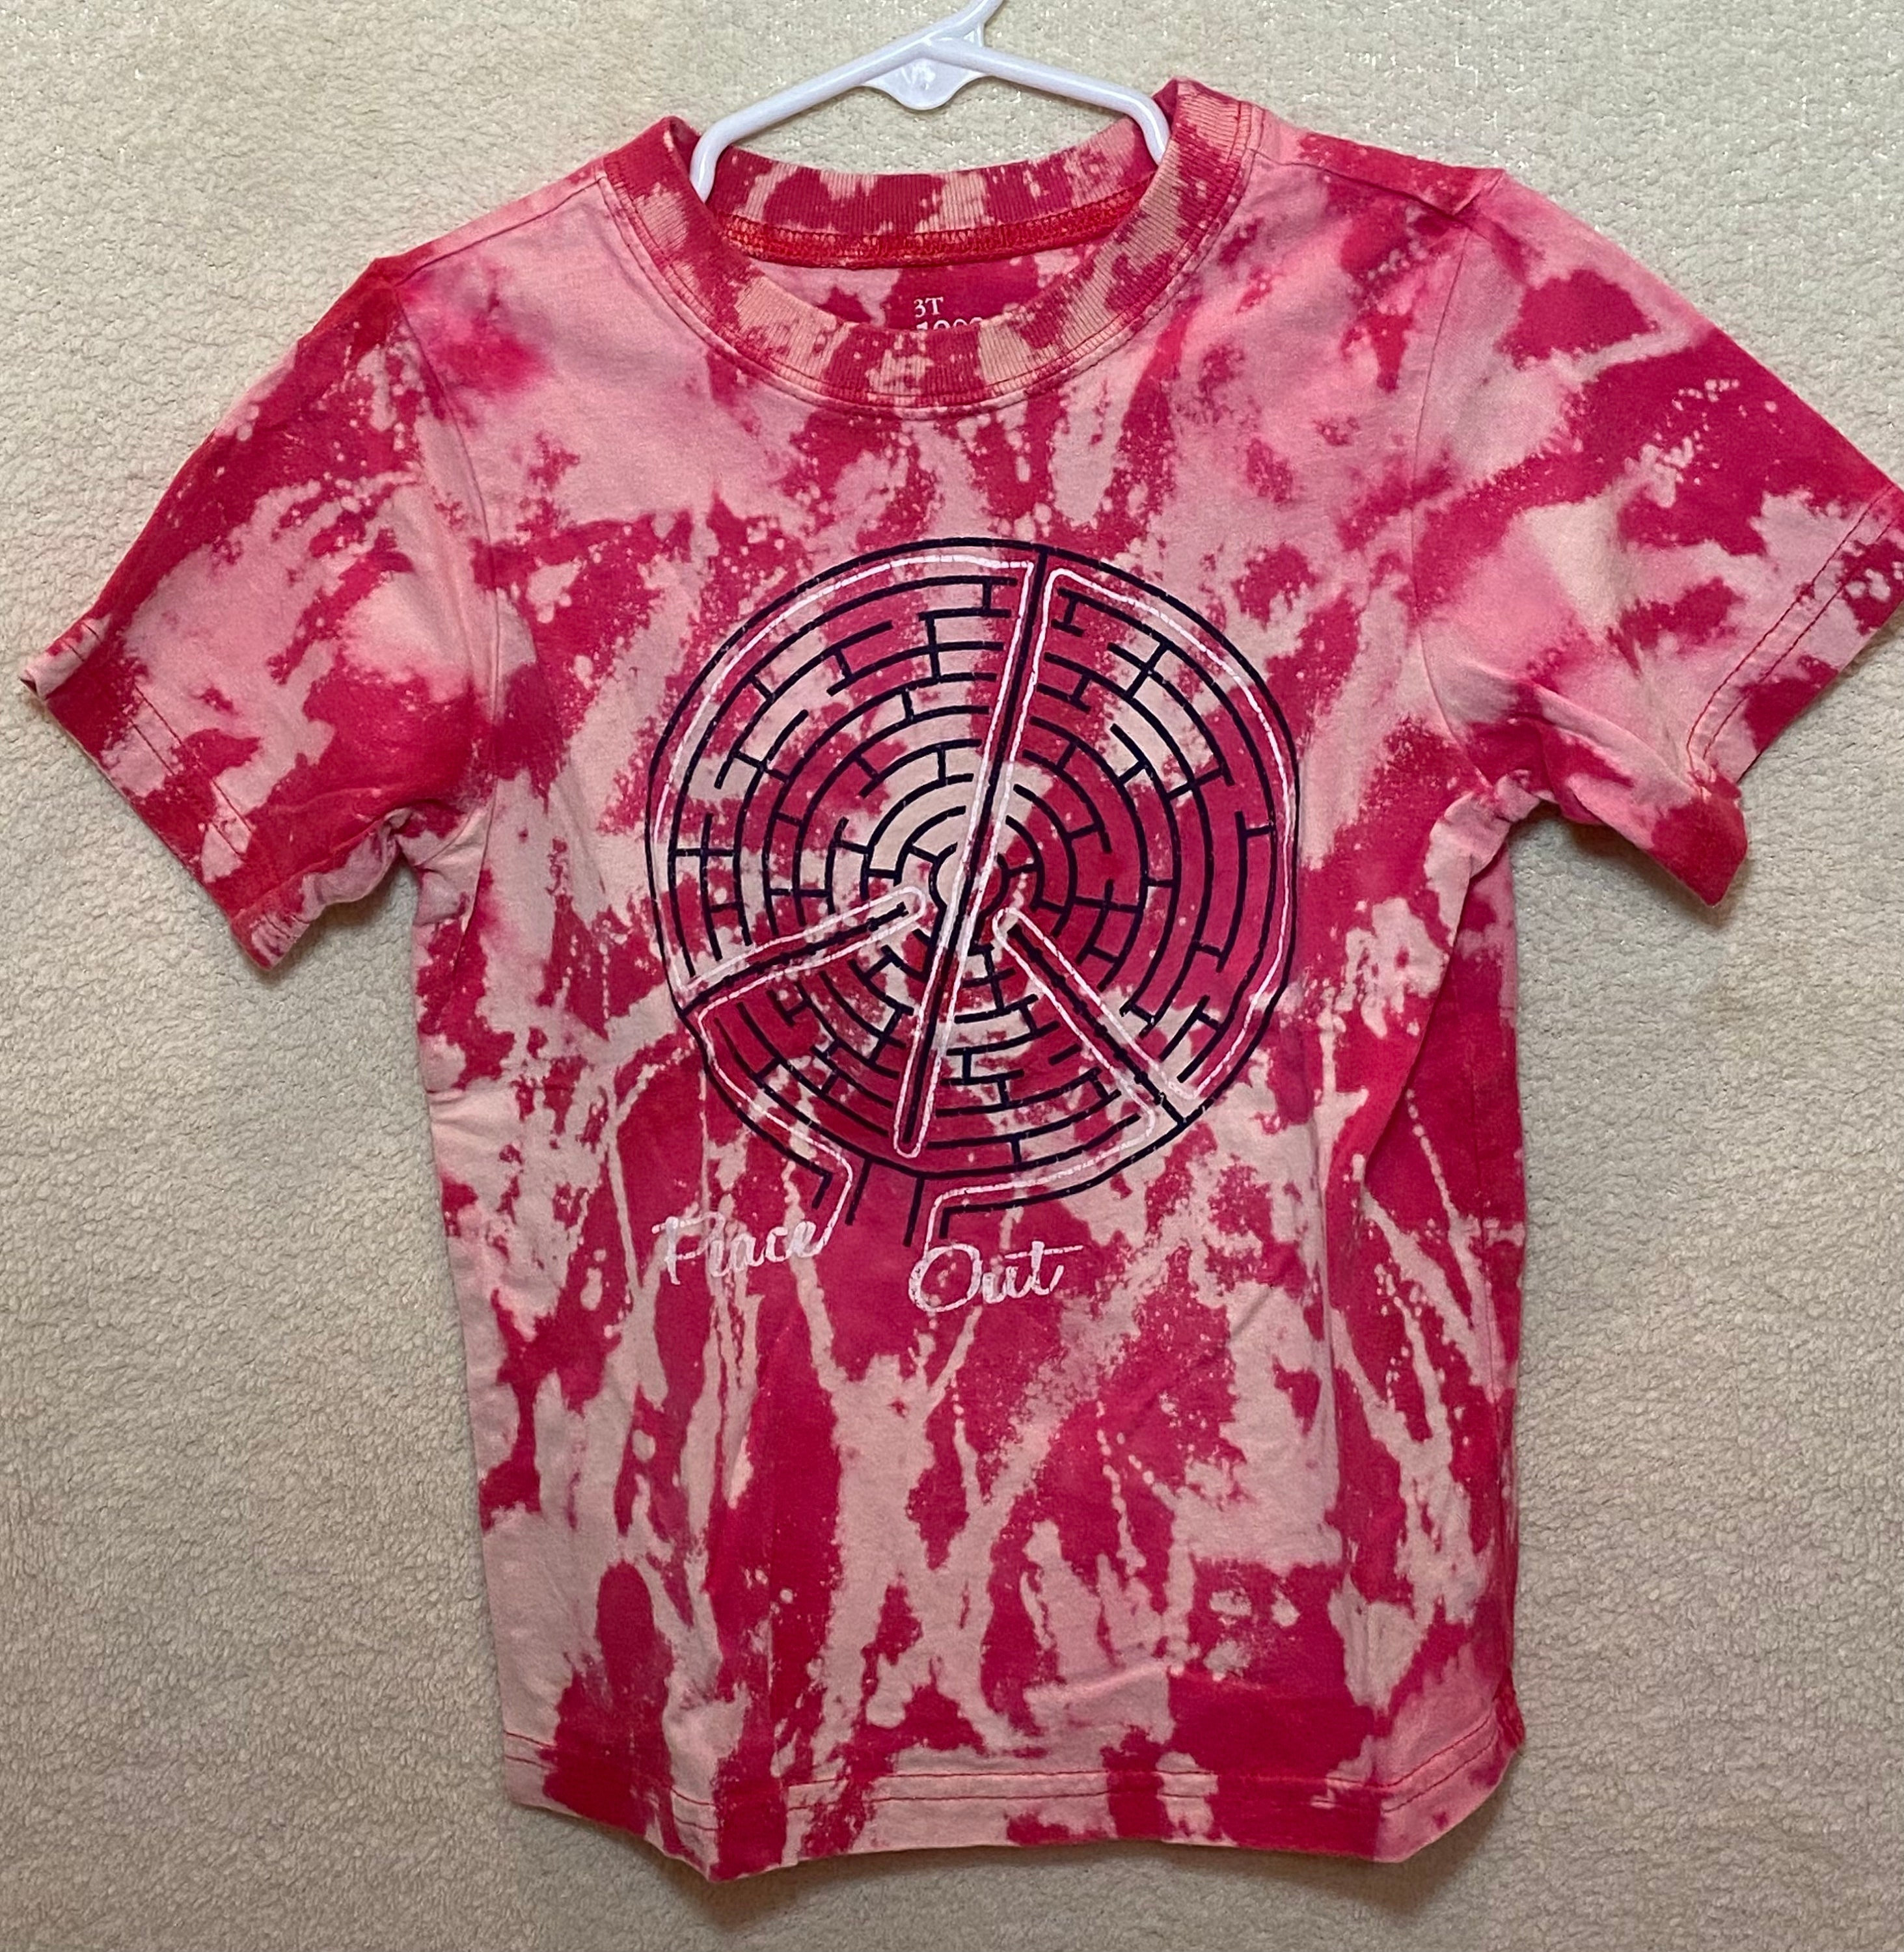 Discover peace out maze tee Tie Dye T Shirt 3D